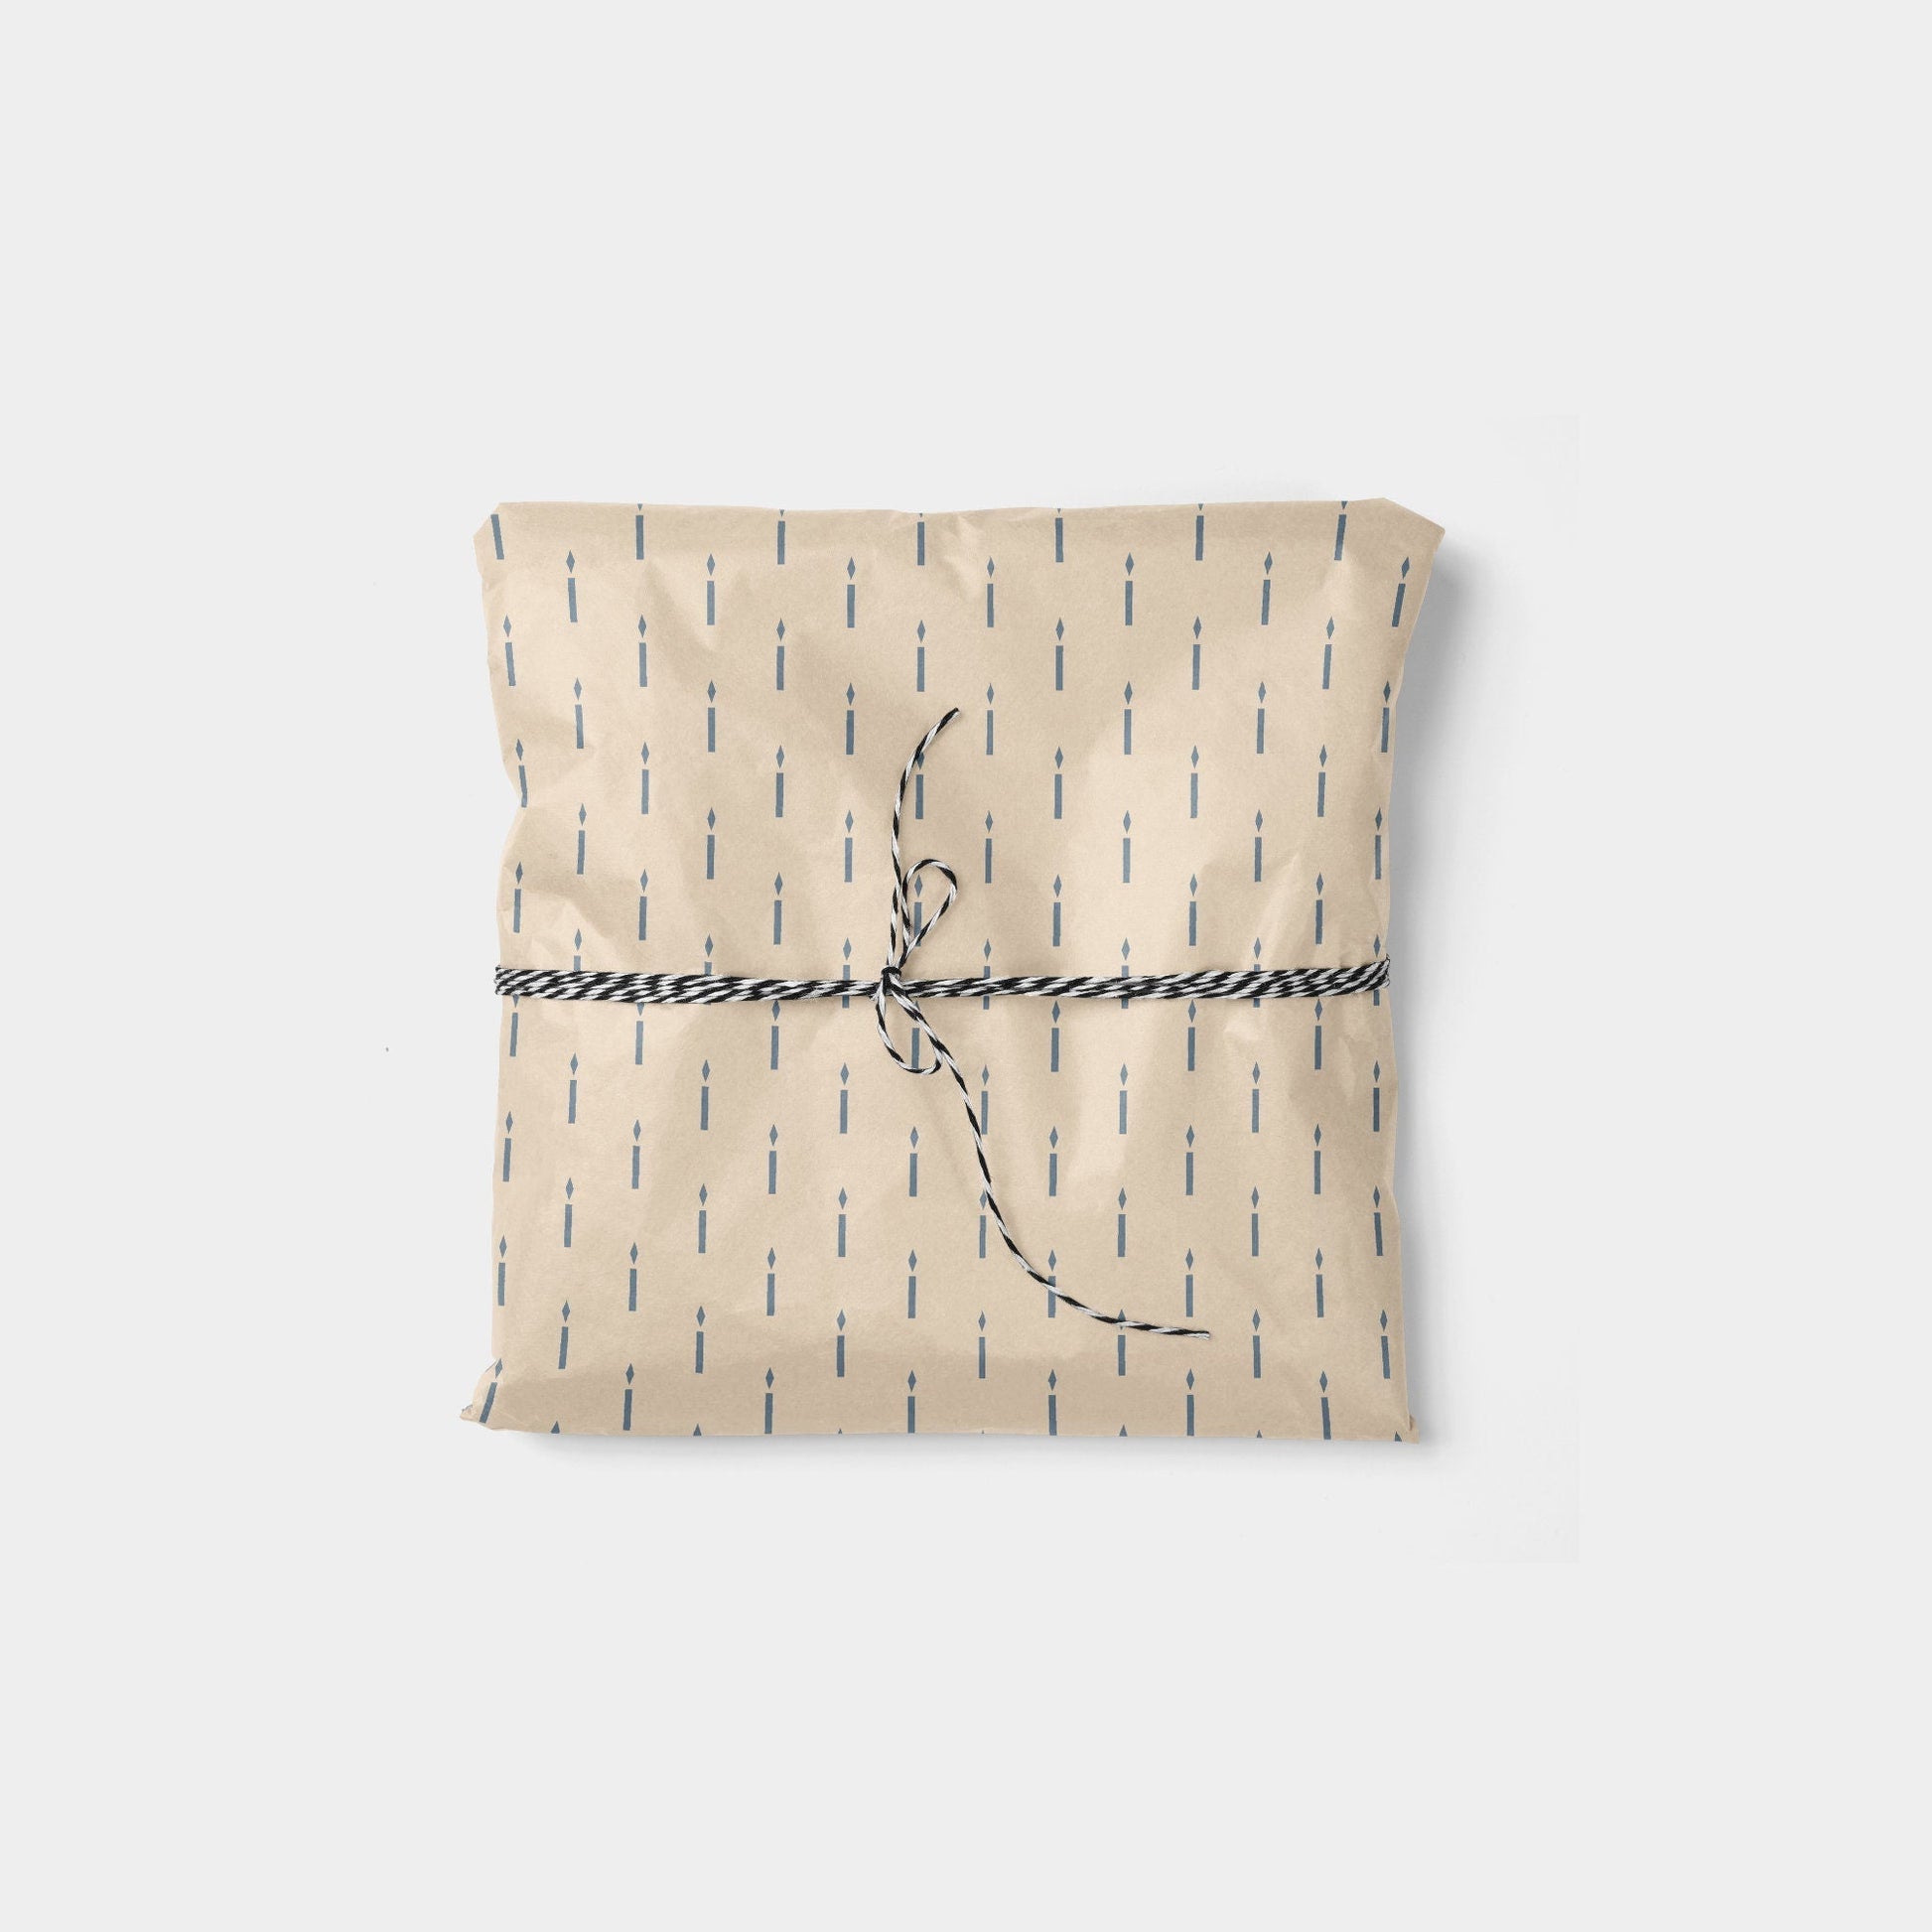 Minimal Candle Holiday Gift Wrap-Gift Wrapping-The Design Craft